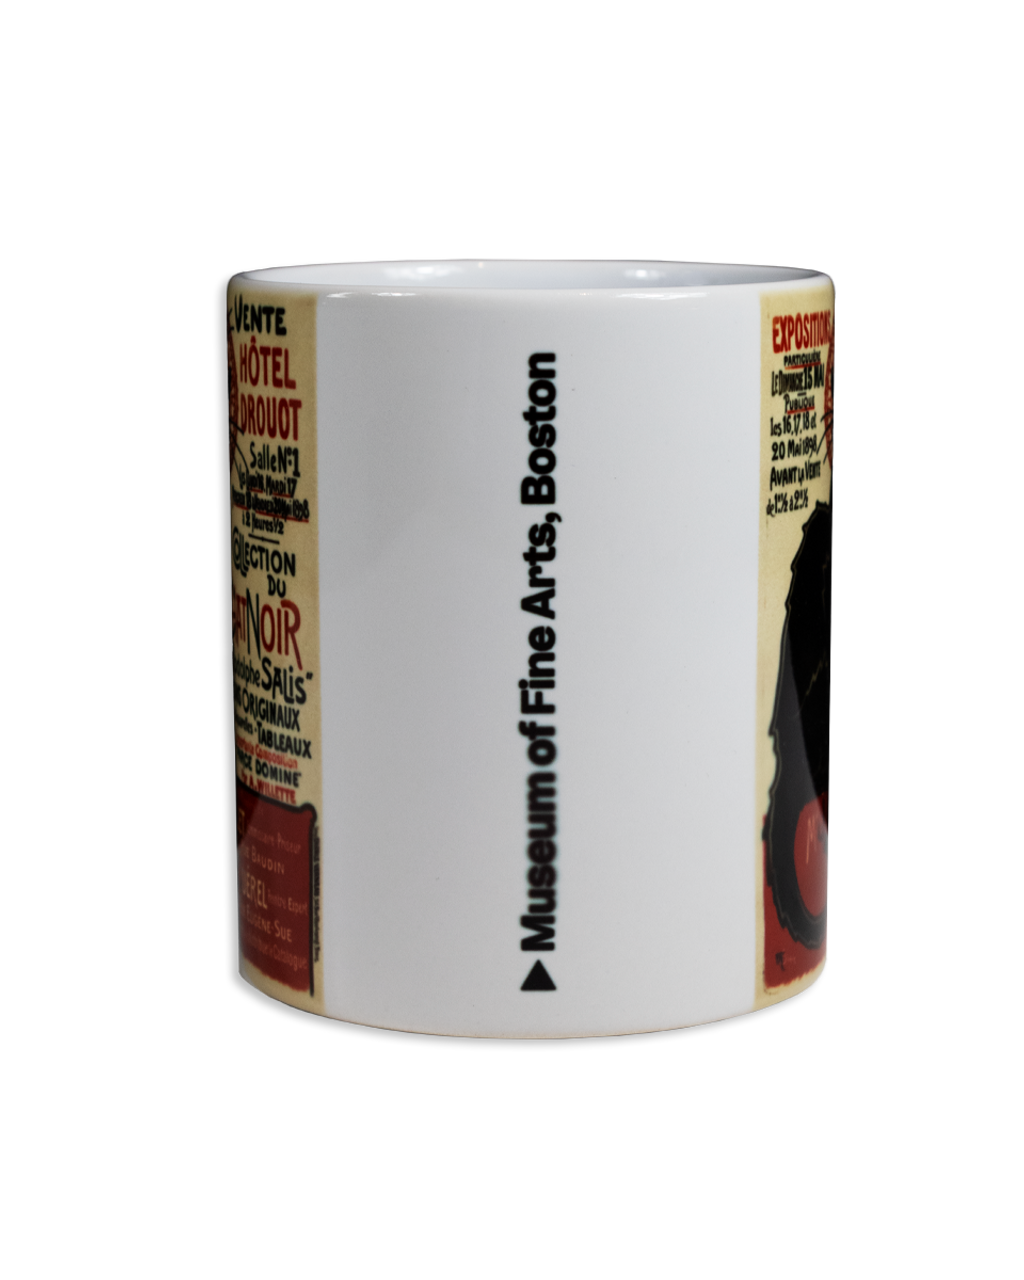 Le Chat Noir Boutique: New York City NYC Spill Proof Coffee Mug, Misc. Coffee  Mugs, CMNYCNewYorkSpillProof